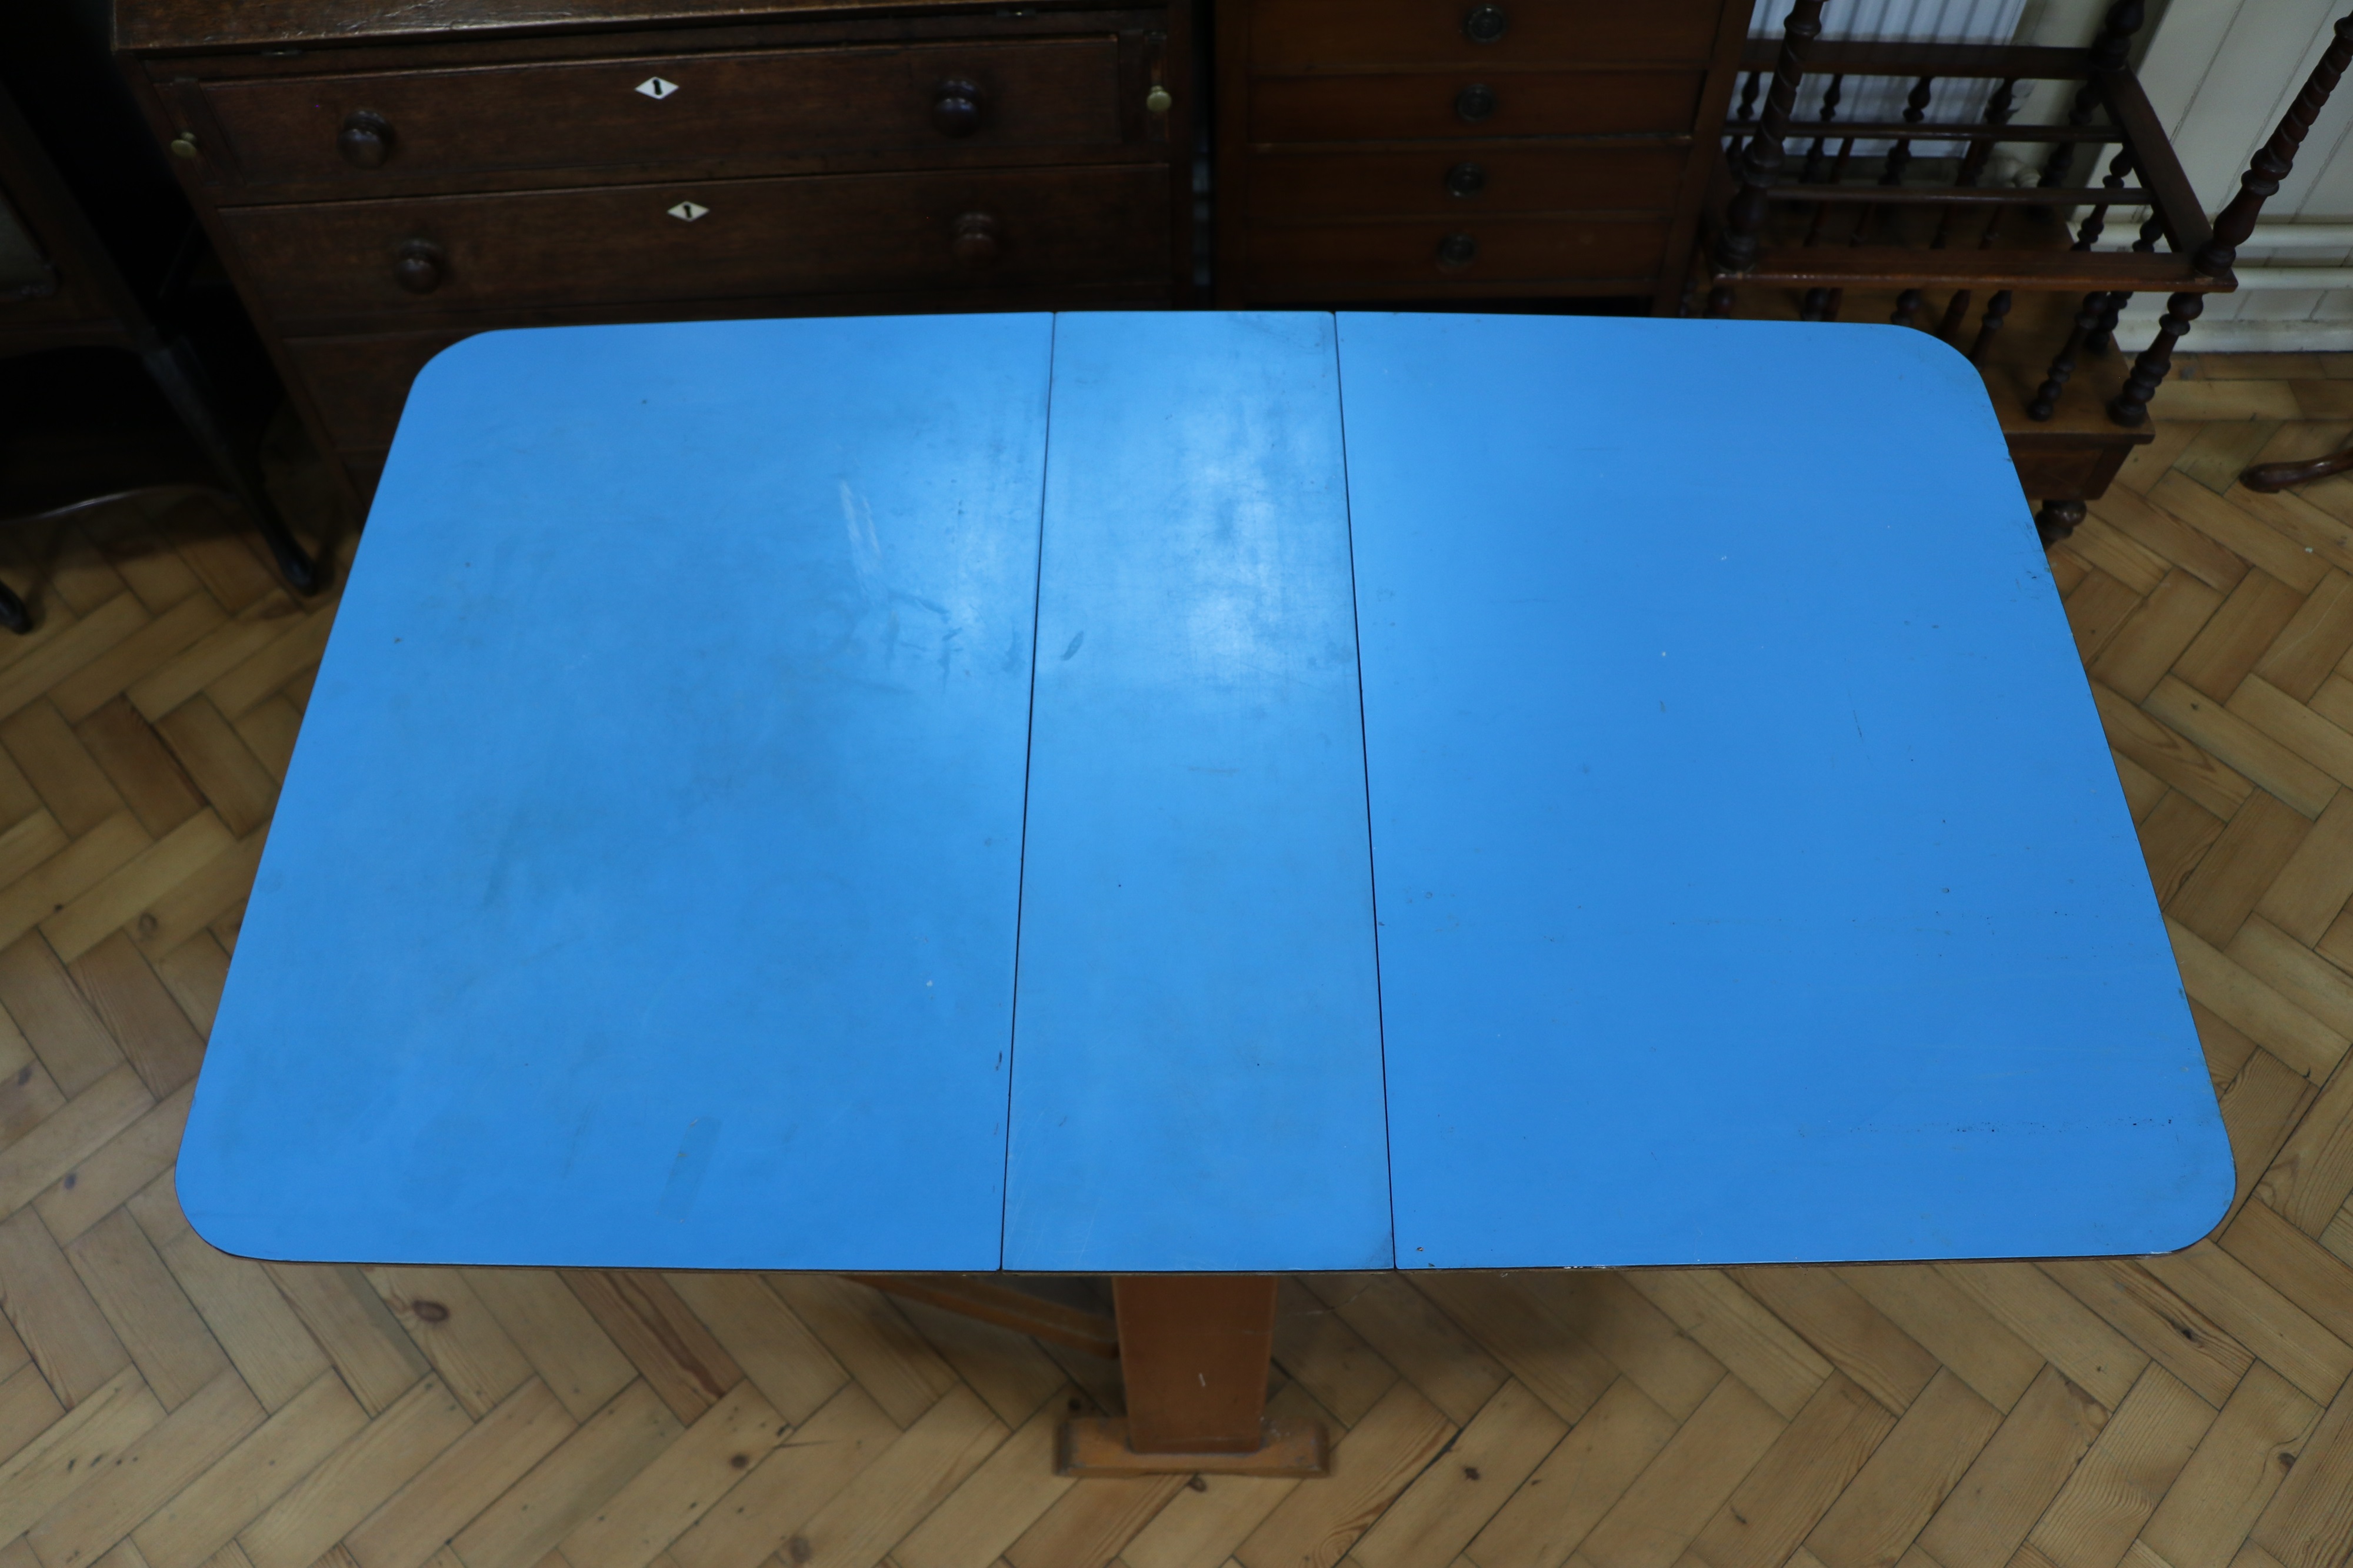 A mid-Century blue Formica topped drop-leaf kitchen table, circa 1950s - 1960s, 75 cm x 119 cm x - Image 2 of 3